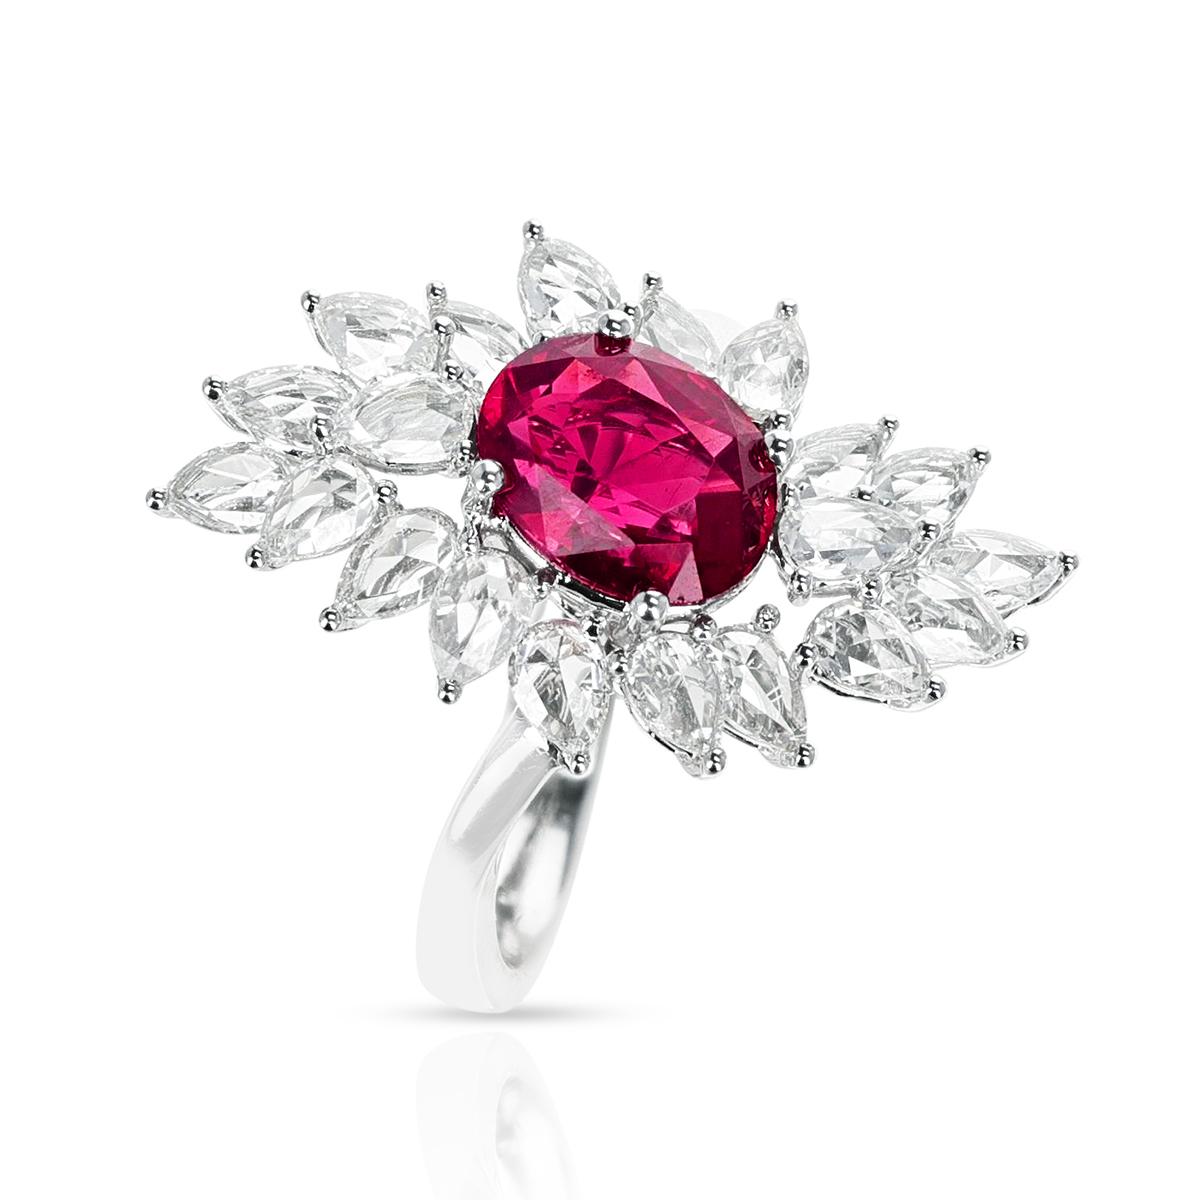 A GRS Certified Oval-Orangy Pinkish Red 2.65 ct. Tanzanian Spinel and Diamond Cocktail Ring made in 18 Karat White Gold. The diamonds weigh appx. 1.71 cts. The total weight of the ring is 6.83 grams. The ring size is US 7.
